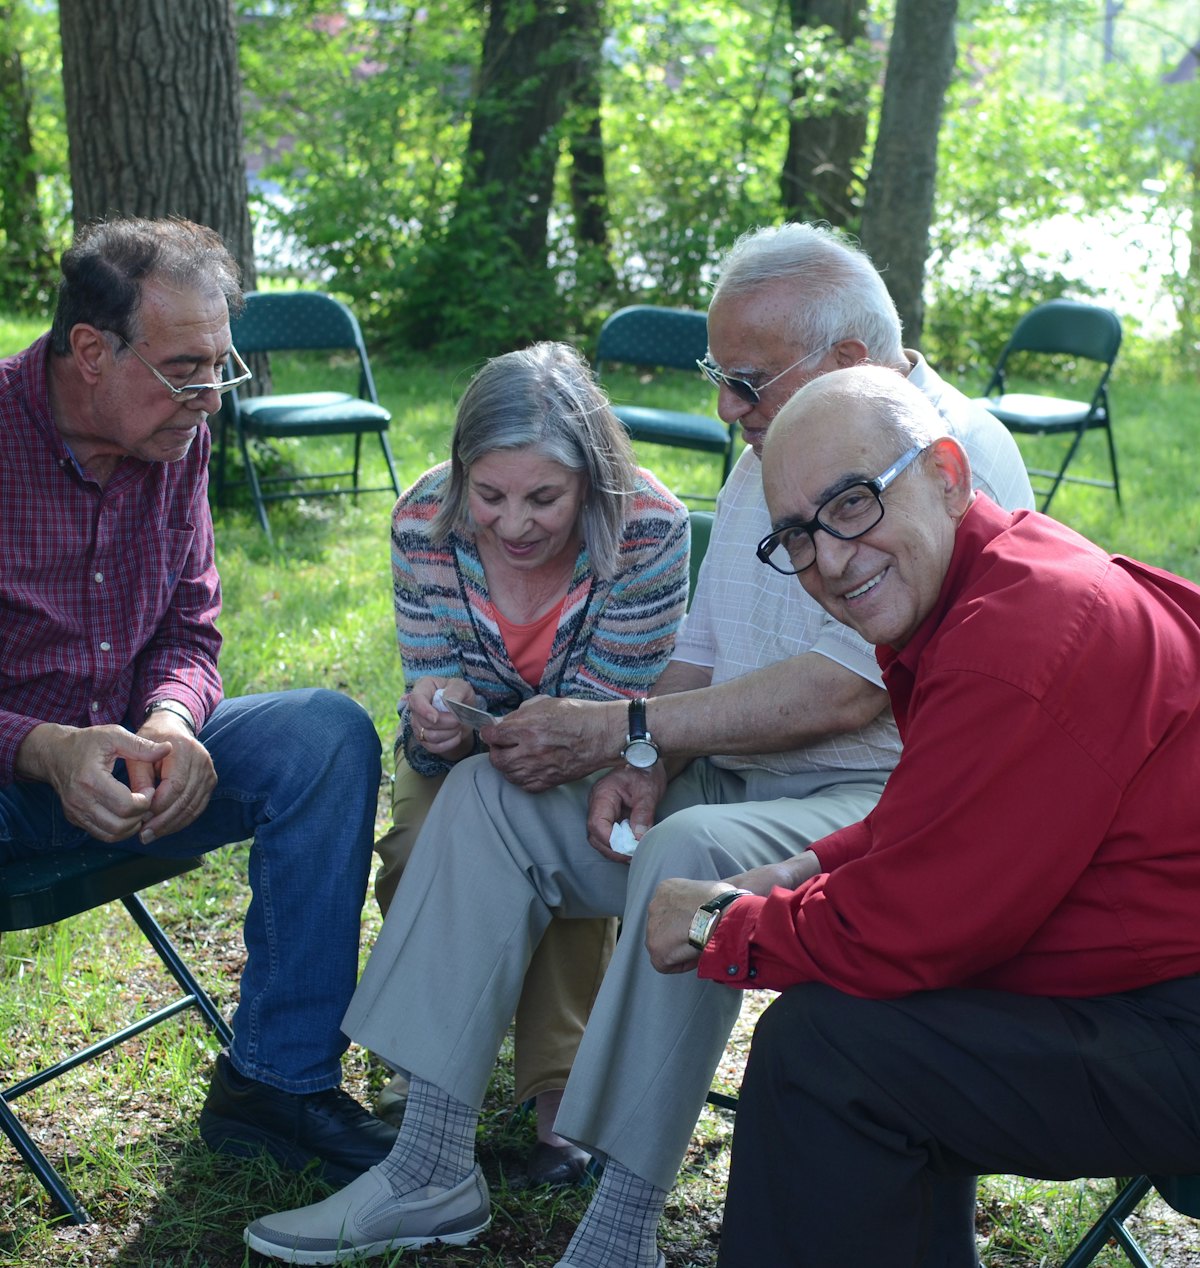 Ridvan is a joyful occasion for fellowship. Here, members of Baha'i community socialize at a recent celebration in Louisville, Kentucky, USA.